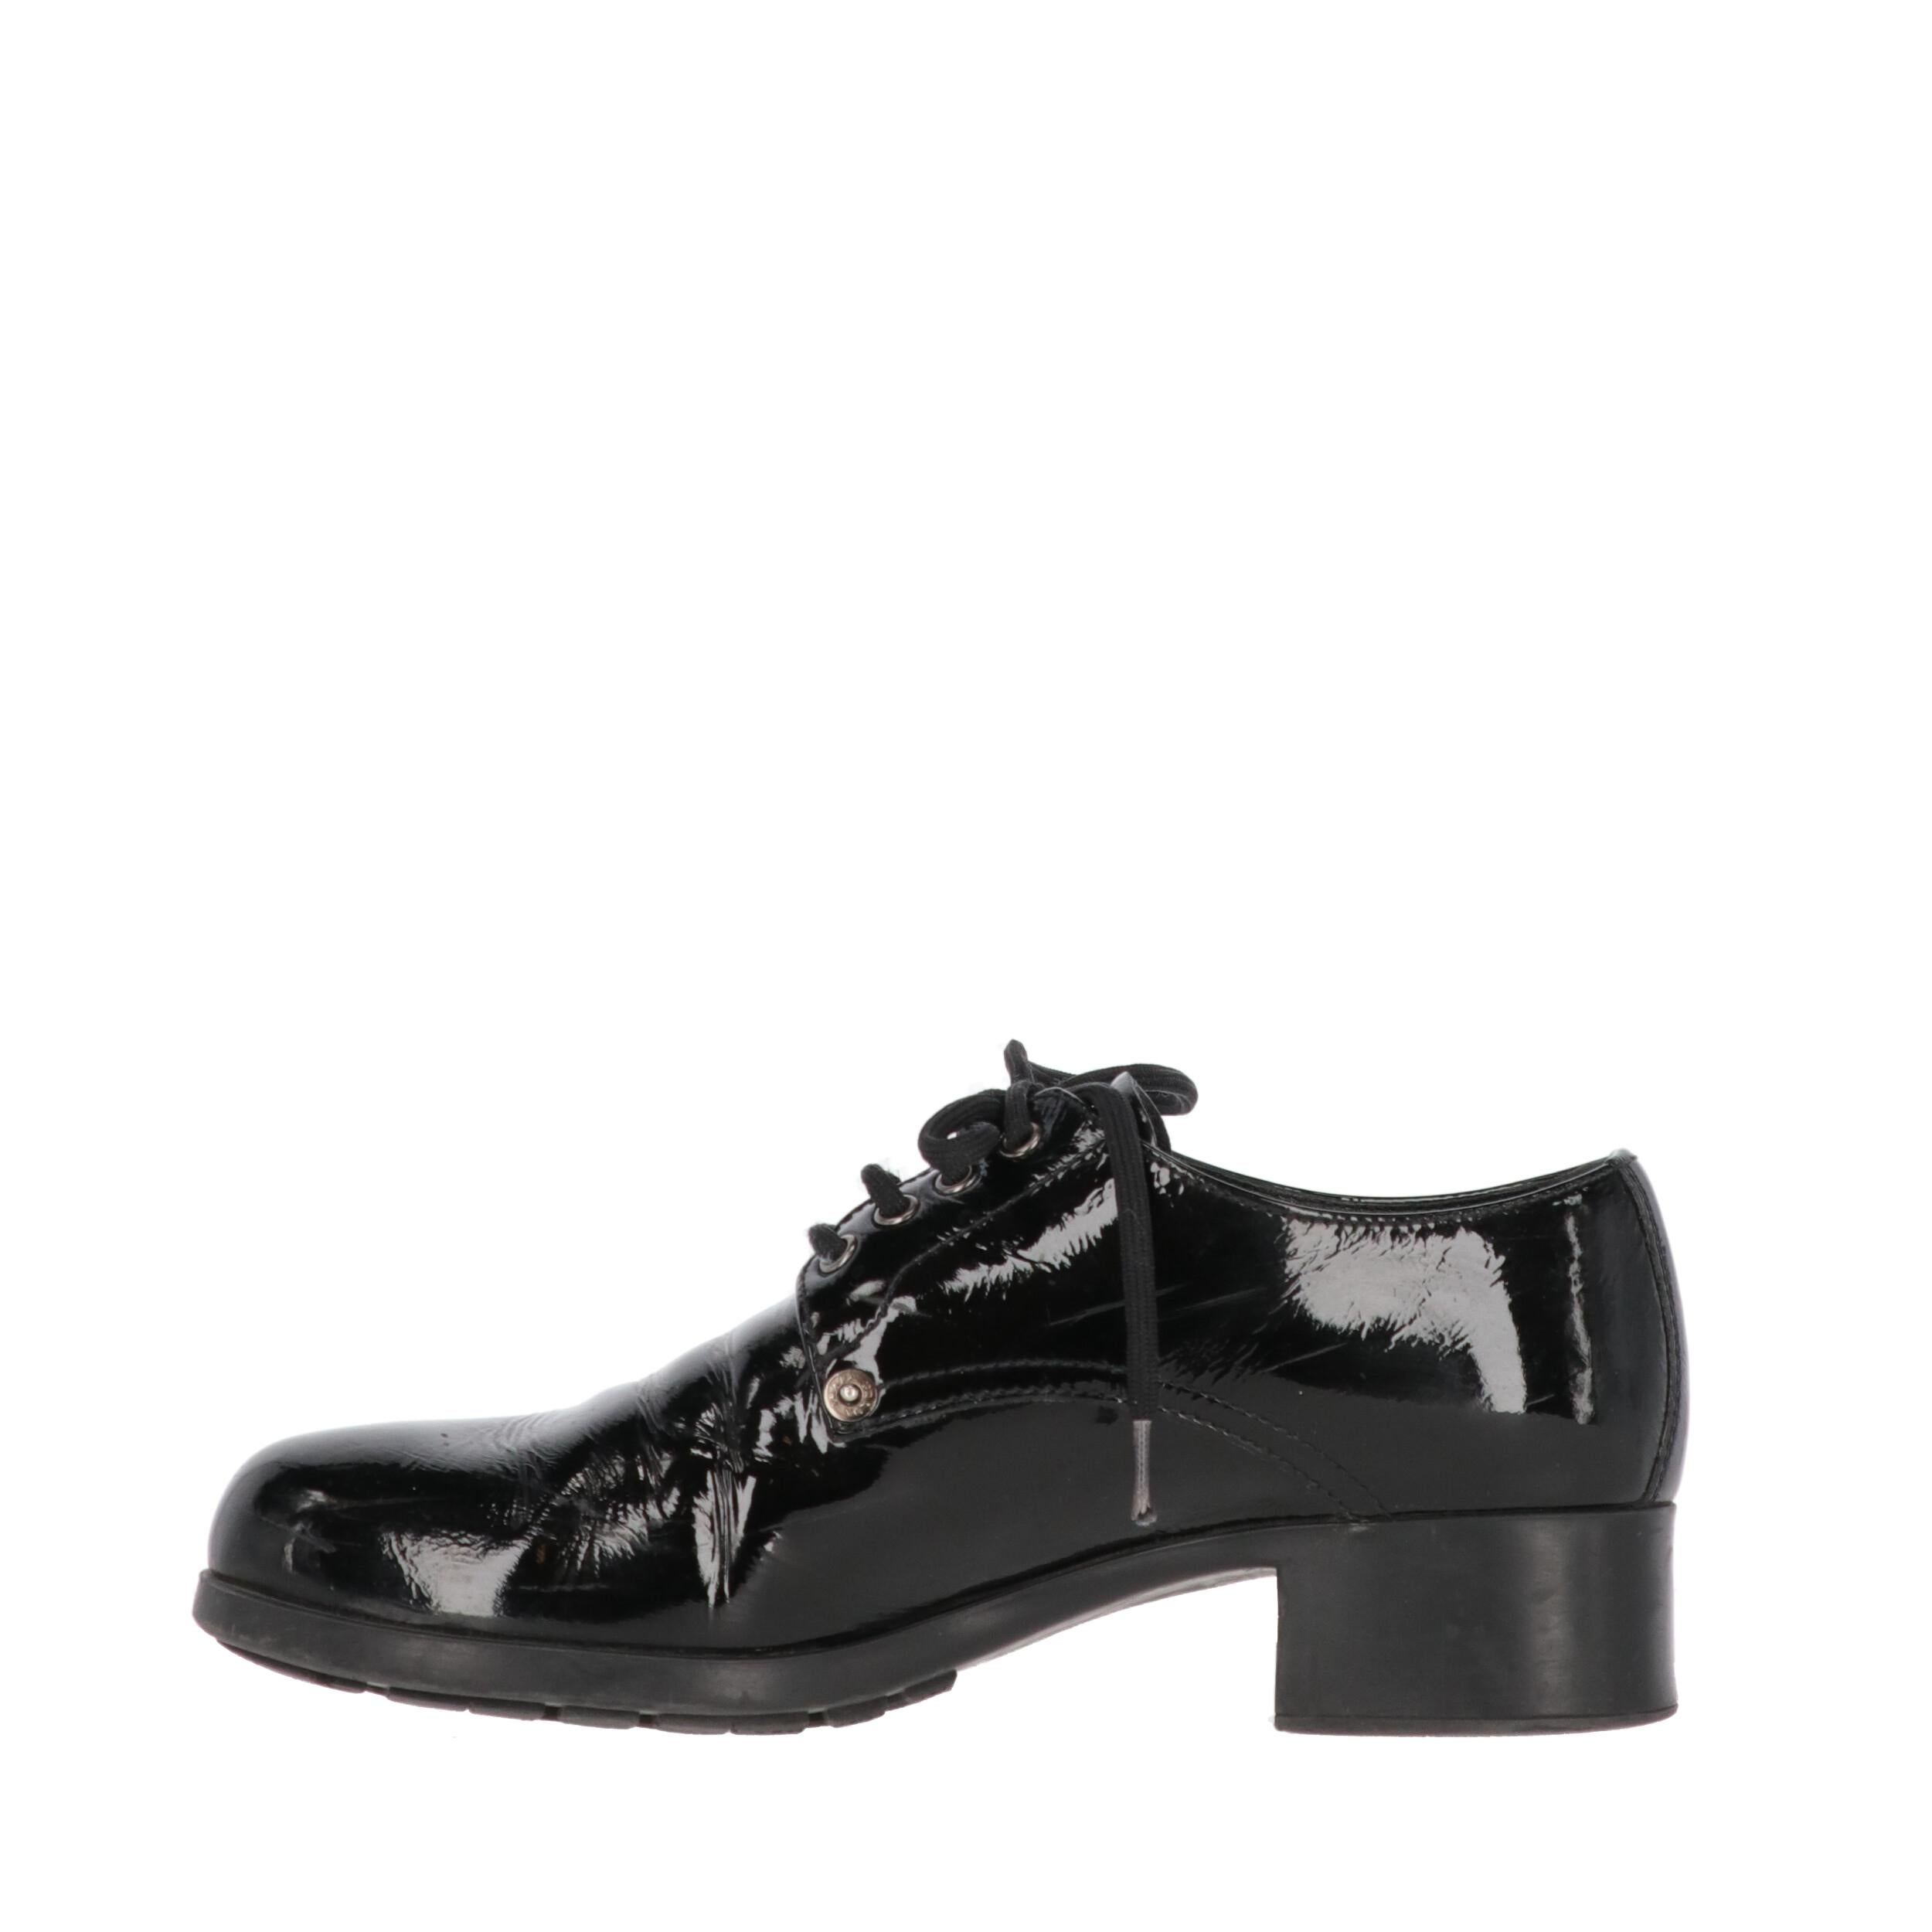 Prada black patent leather lace-up shoes with rounded toe and chunky low heel.

The product shows very light sings on the leather, as shown in the pictures.
Years: 90s

Made in Italy

Size: 40 EU

Heel: 3,5 cm
Insole lenght: 26 cm 